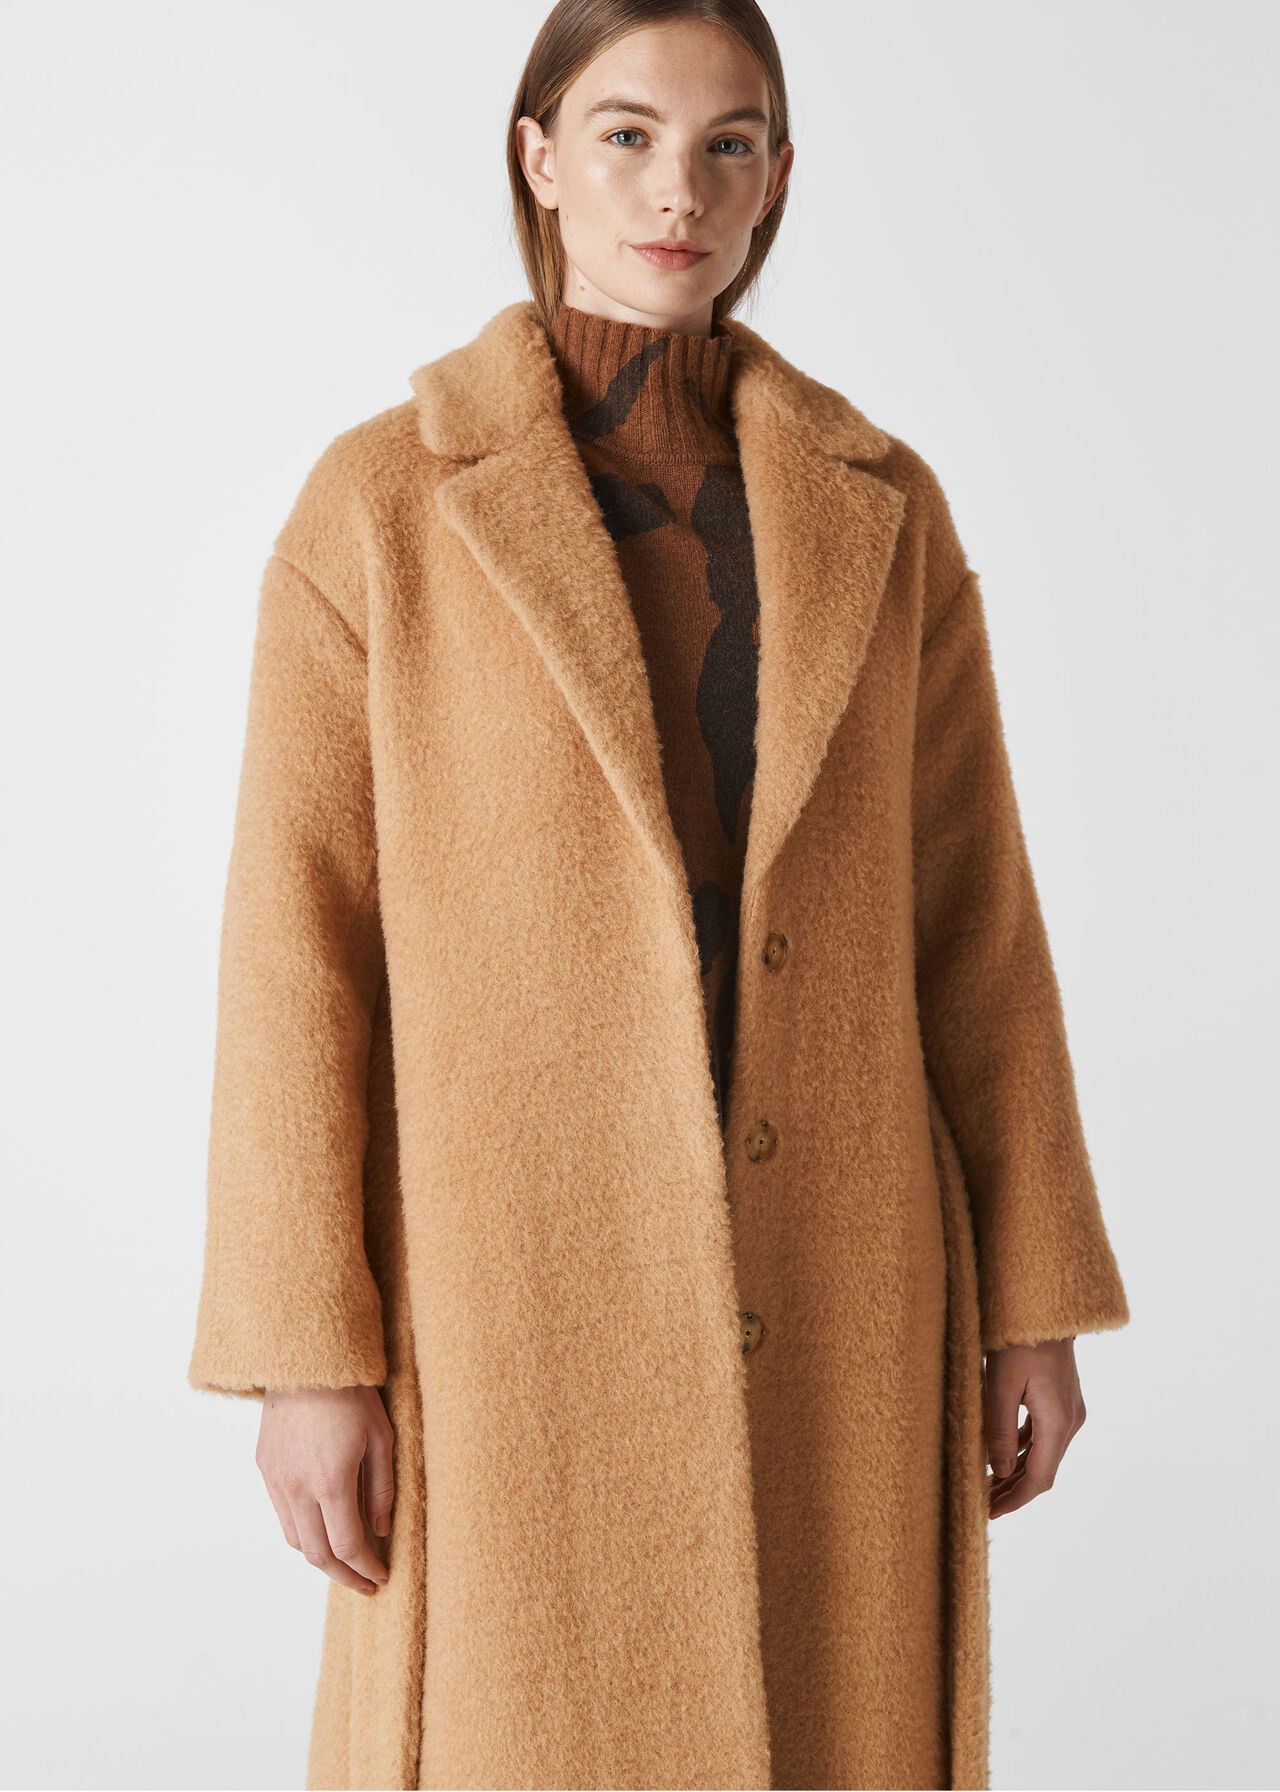 Wool Textured Belted Coat